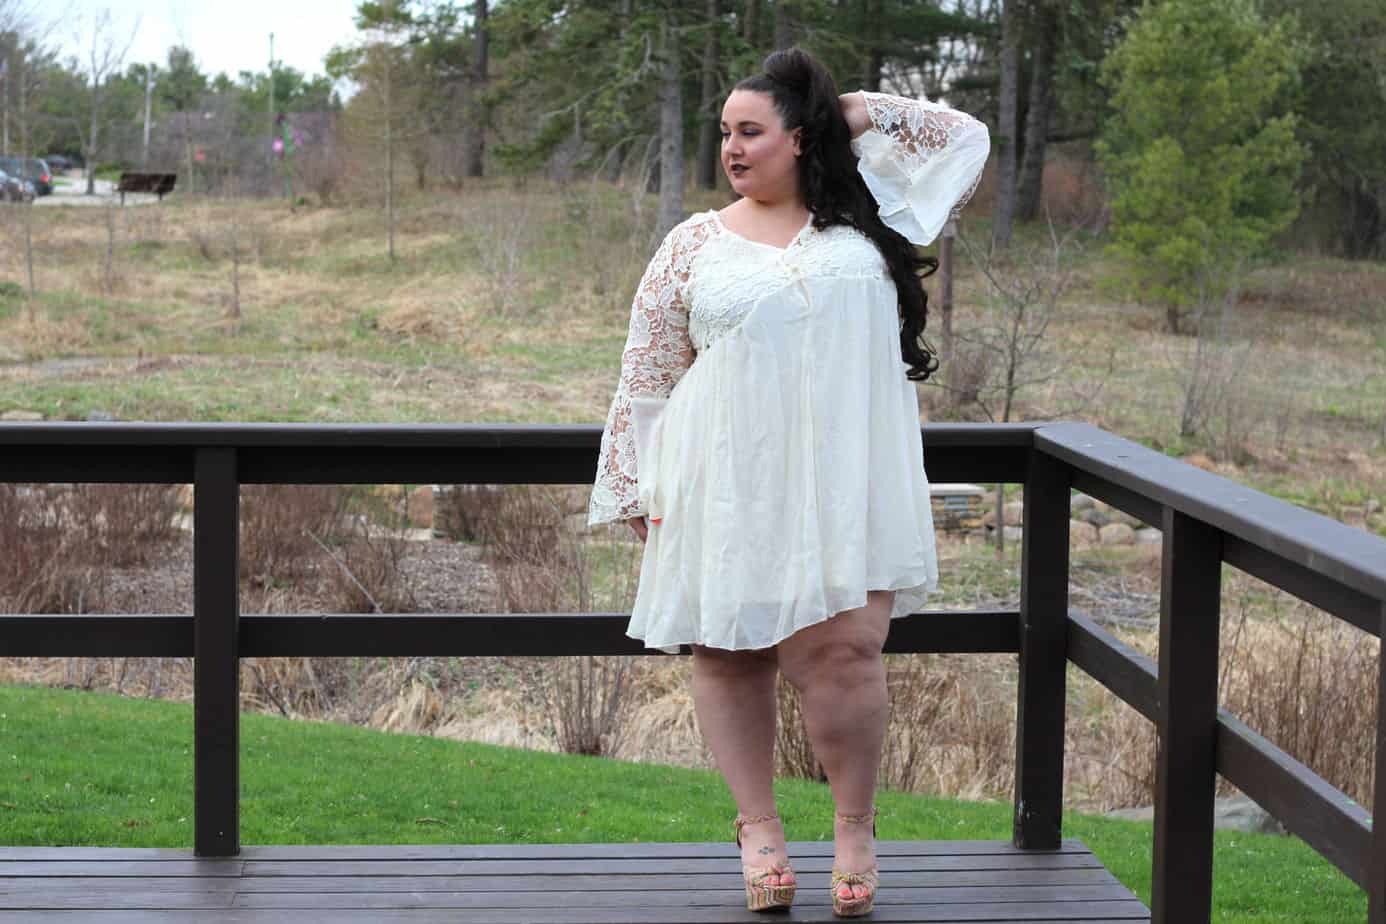 Fashion Focused Curves: Introducing Loralette